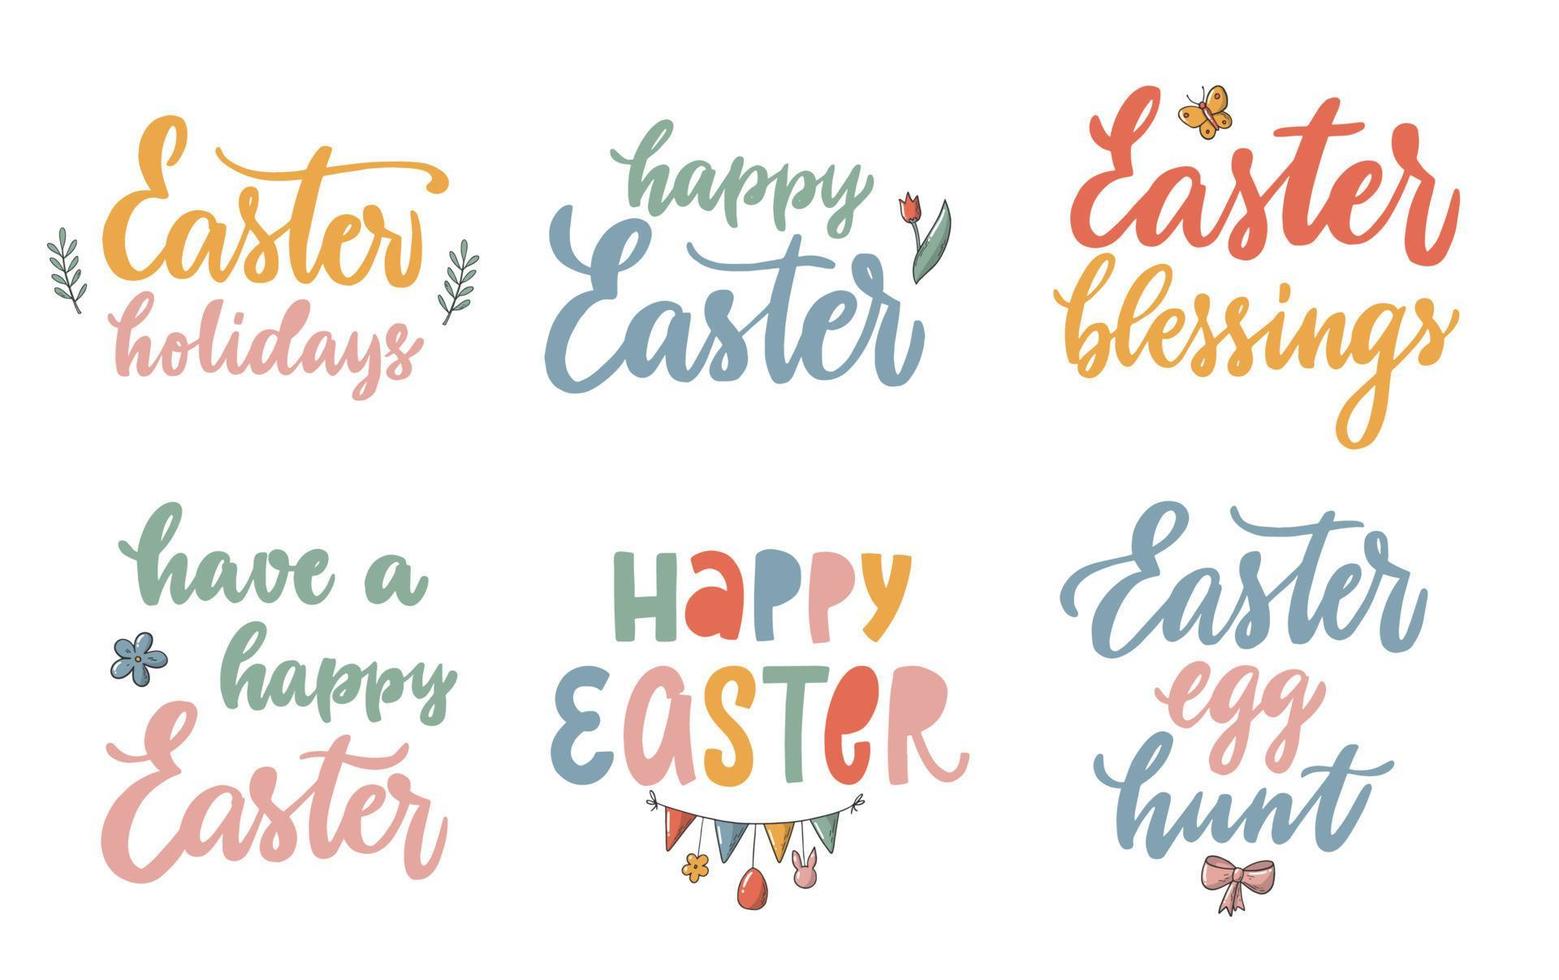 Set of Easter quotes isolated on white background. Good for posters, greeting cards, prints, banners, stickers, invitations, sublimations, etc. EPS 10 vector